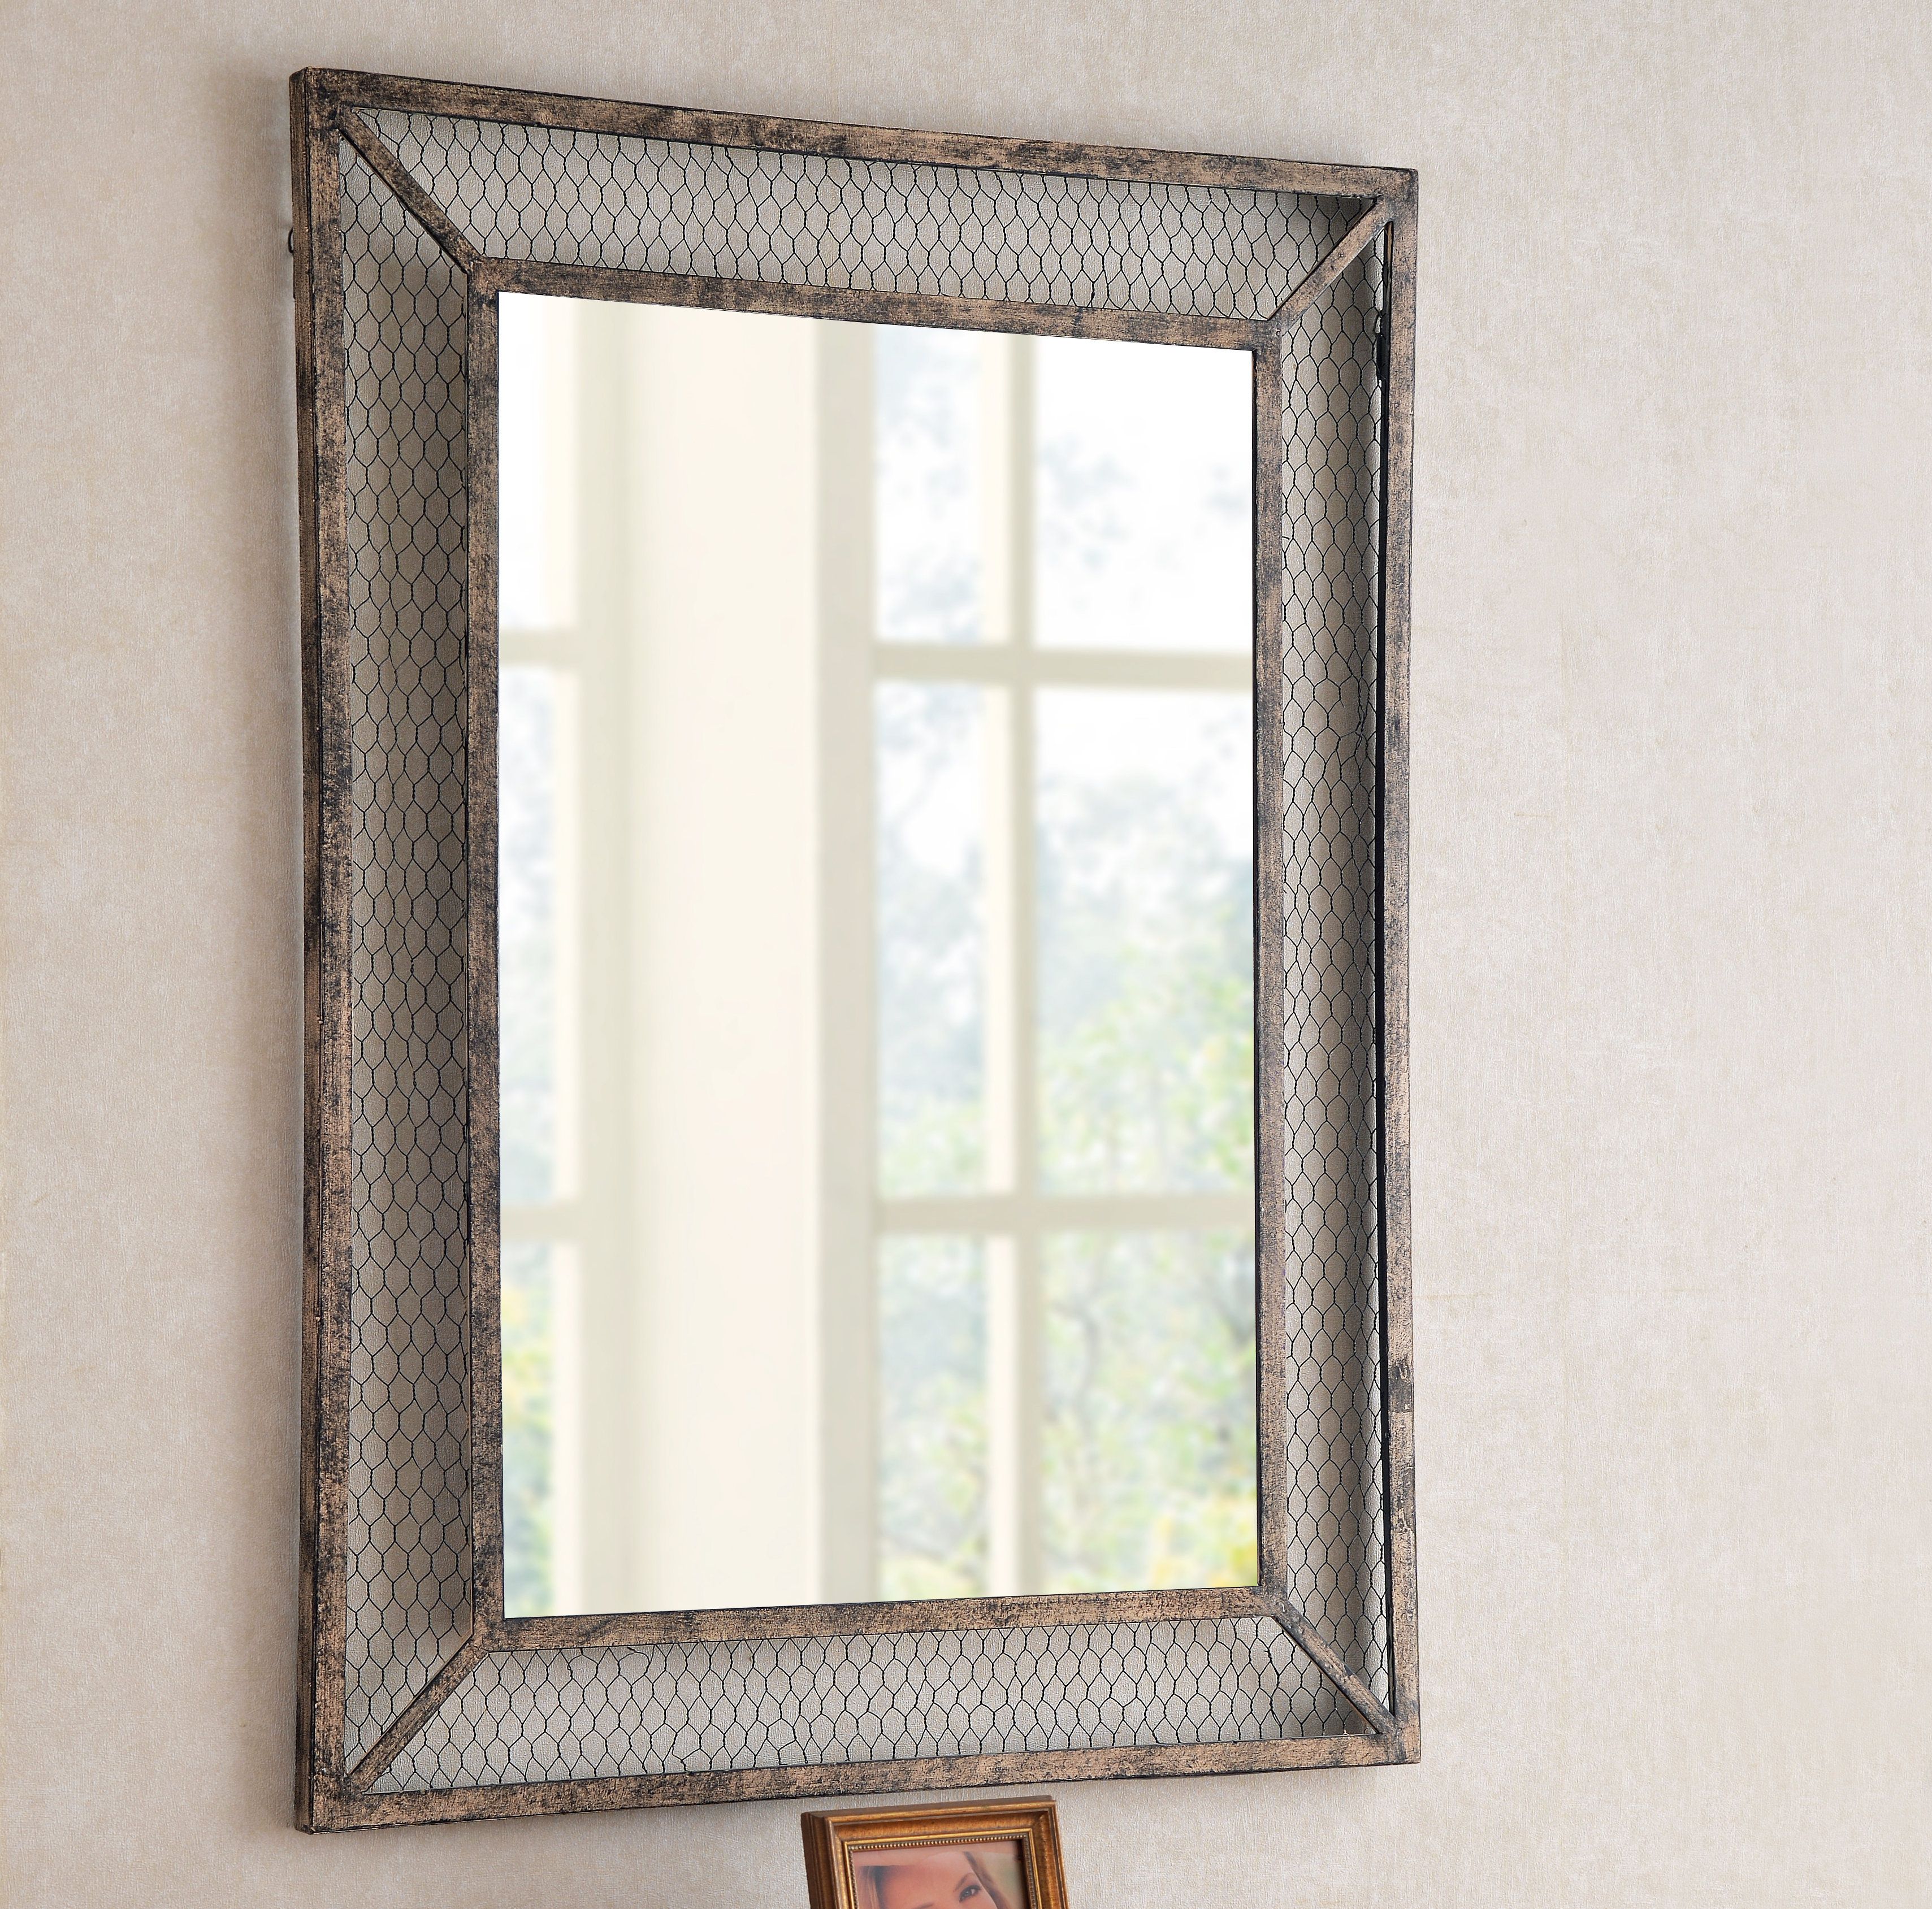 Williston Forge Clanton Accent Mirror & Reviews | Wayfair Inside Rectangle Antique Galvanized Metal Accent Mirrors (View 4 of 20)